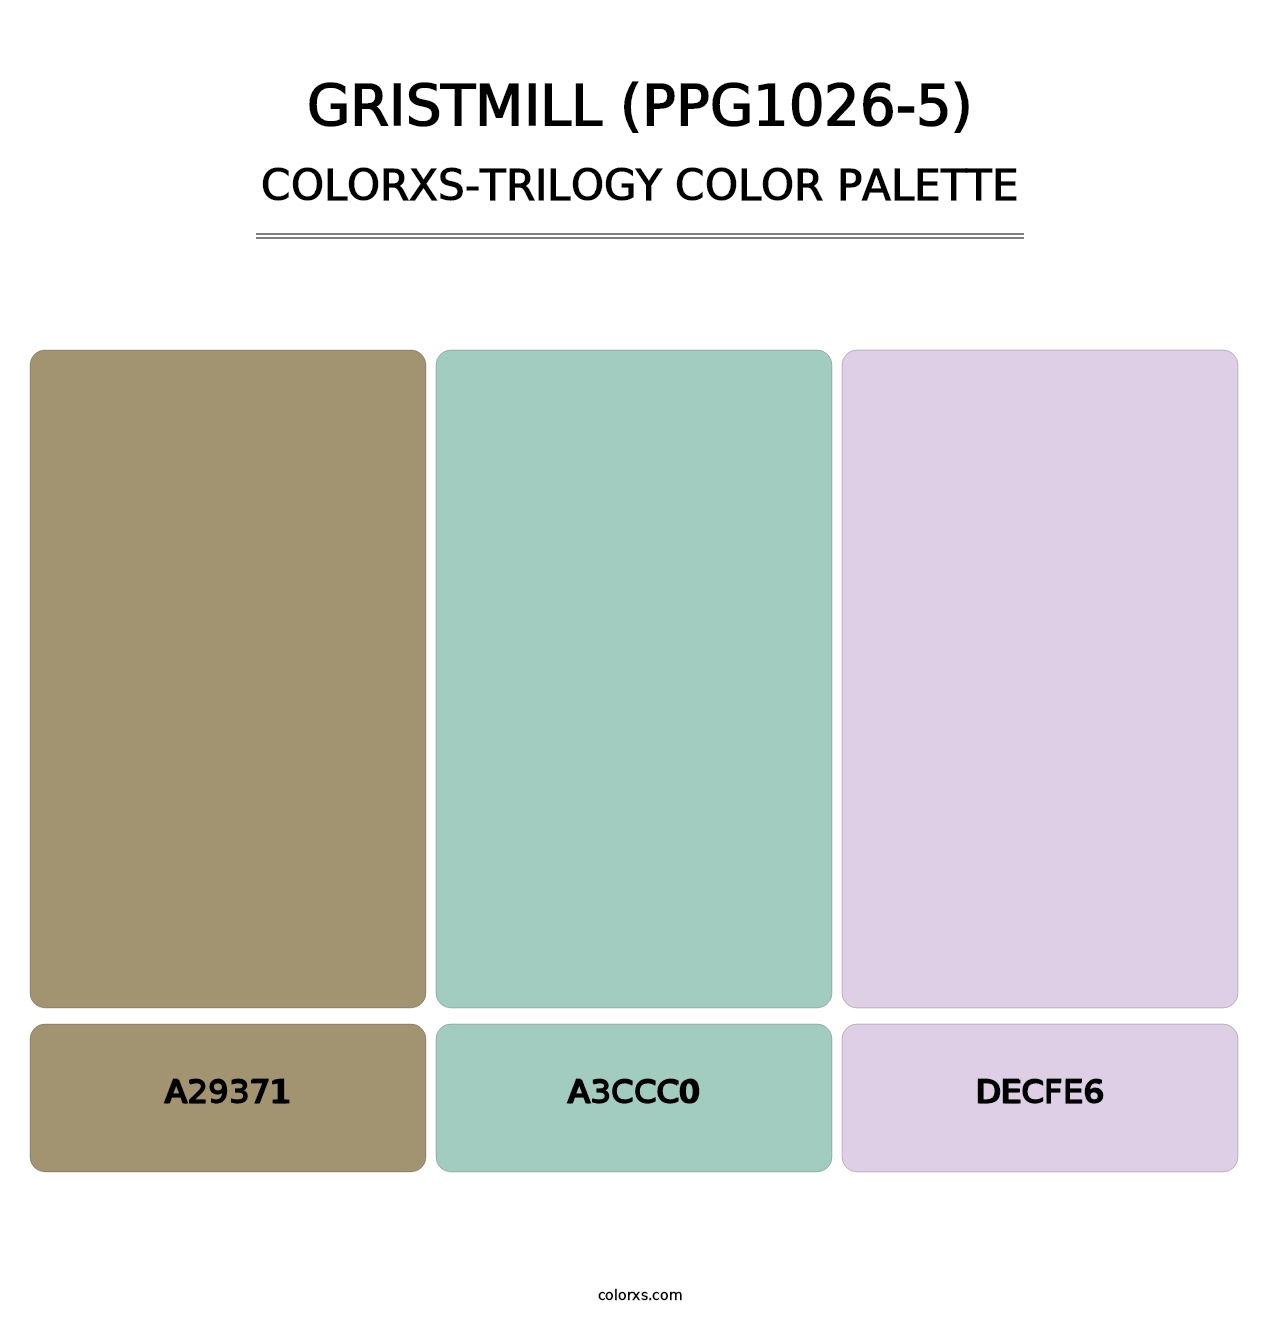 Gristmill (PPG1026-5) - Colorxs Trilogy Palette